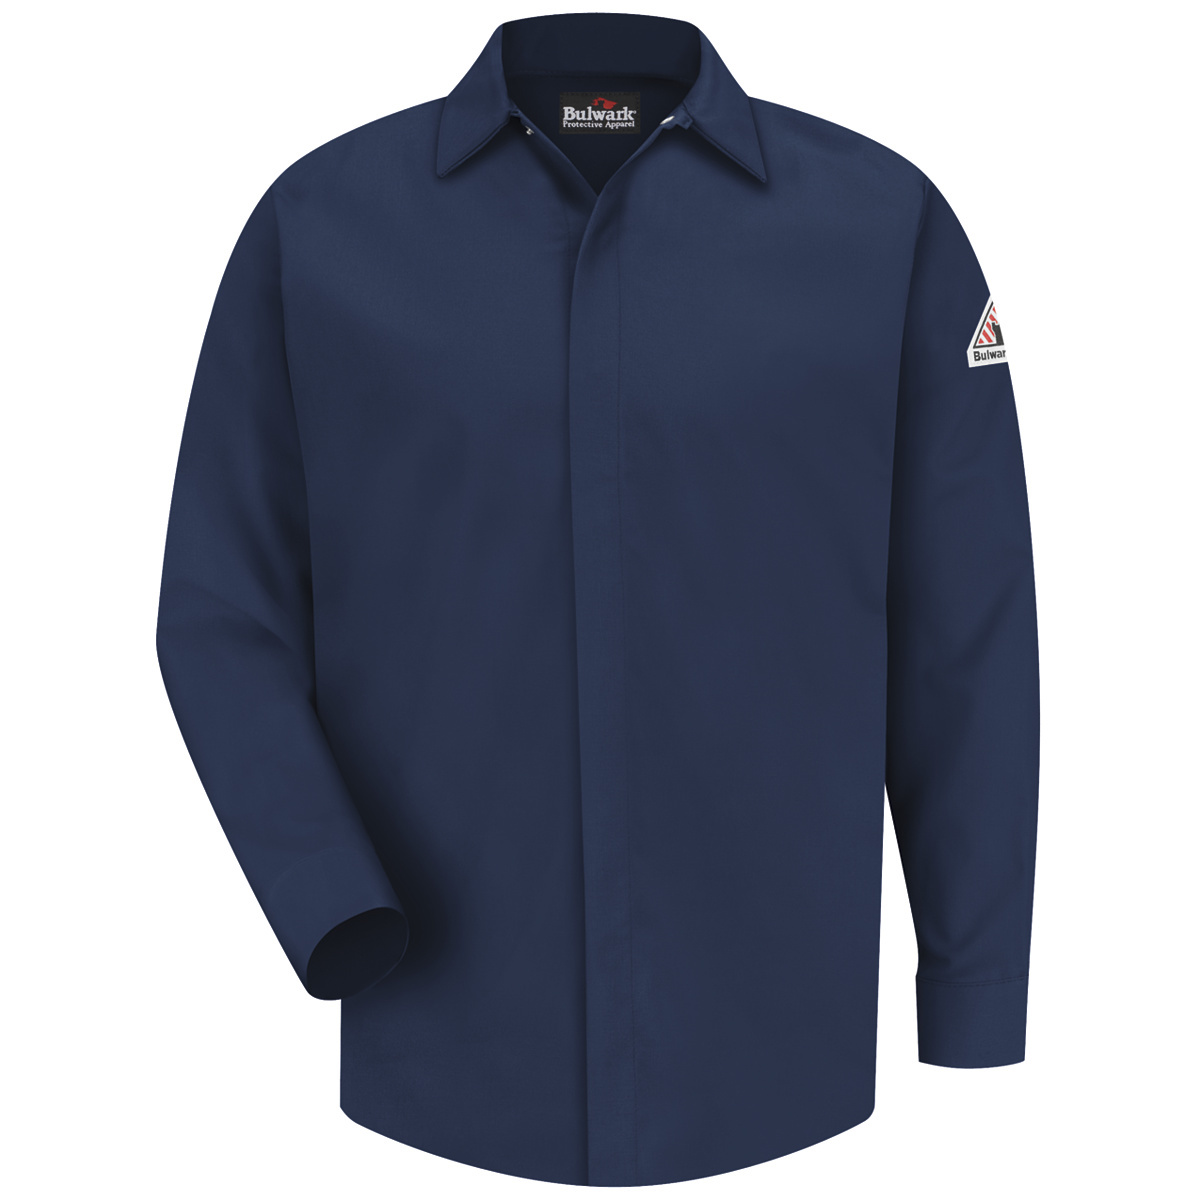 Bulwark® Small| Regular Navy Blue CoolTouch®/Modacrylic/Lyocell/Aramid Flame Resistant Work Shirt With Gripper Front Closure